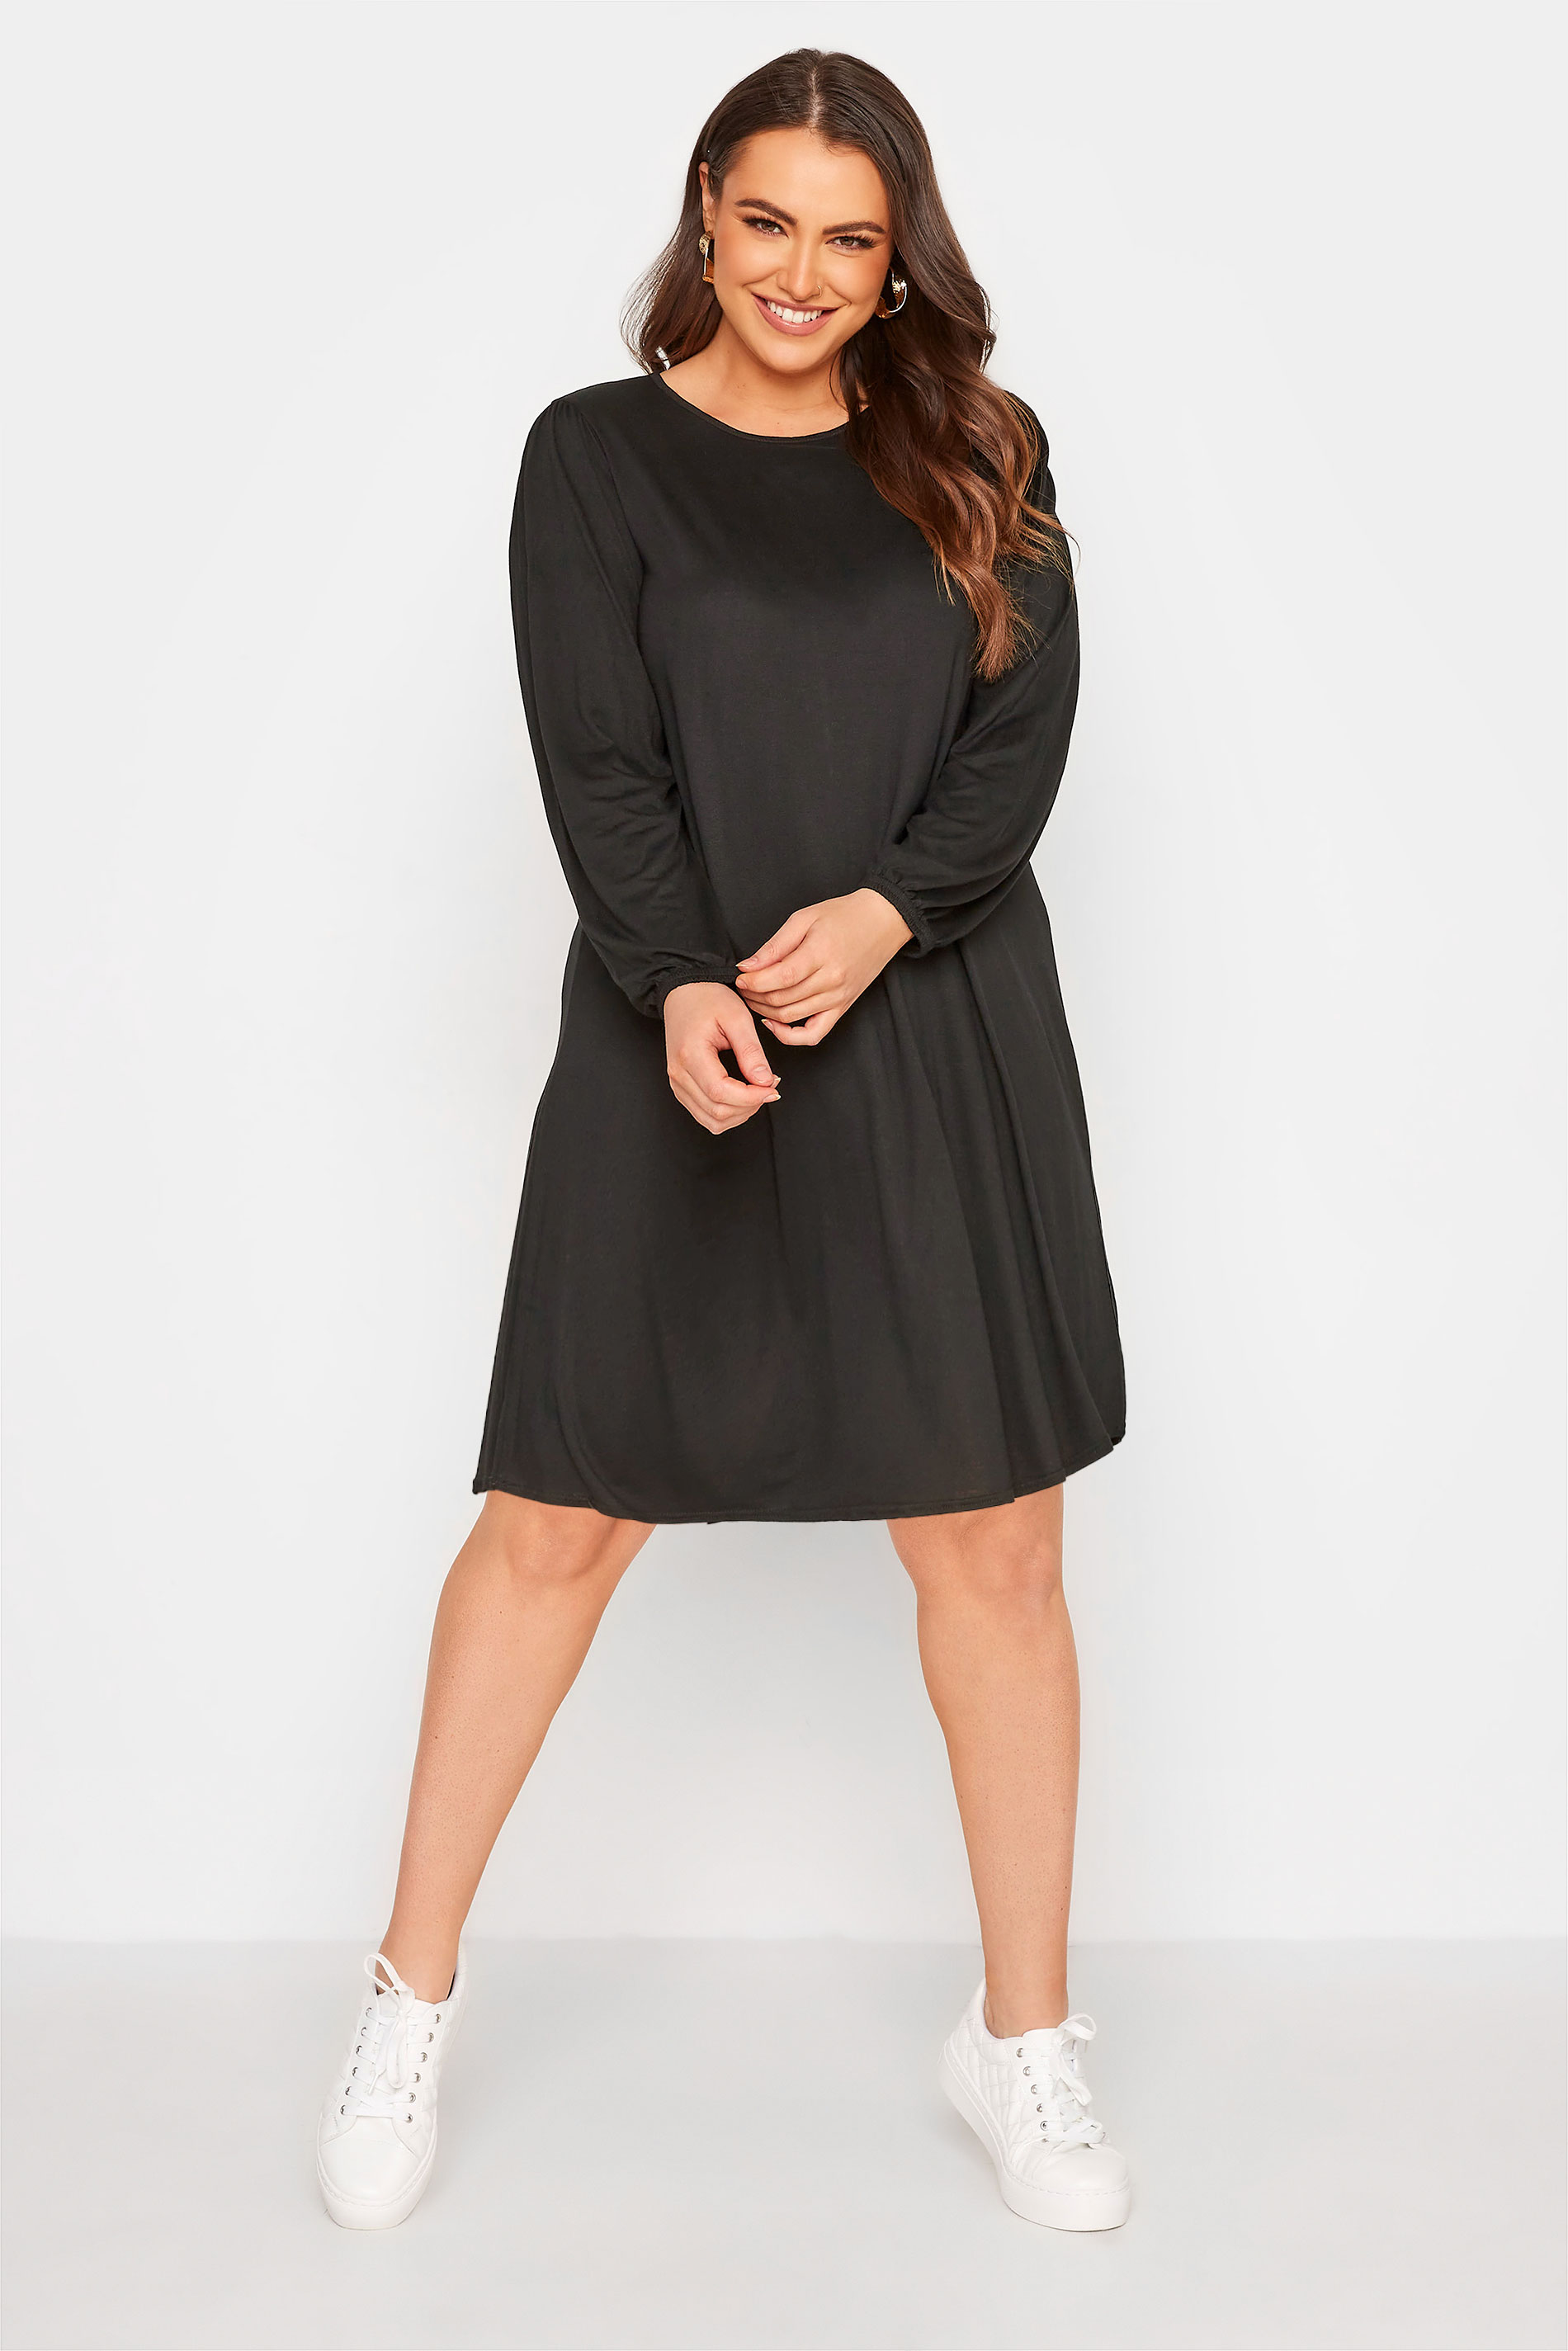 LIMITED COLLECTON Curve Black Swing Dress_A.jpg